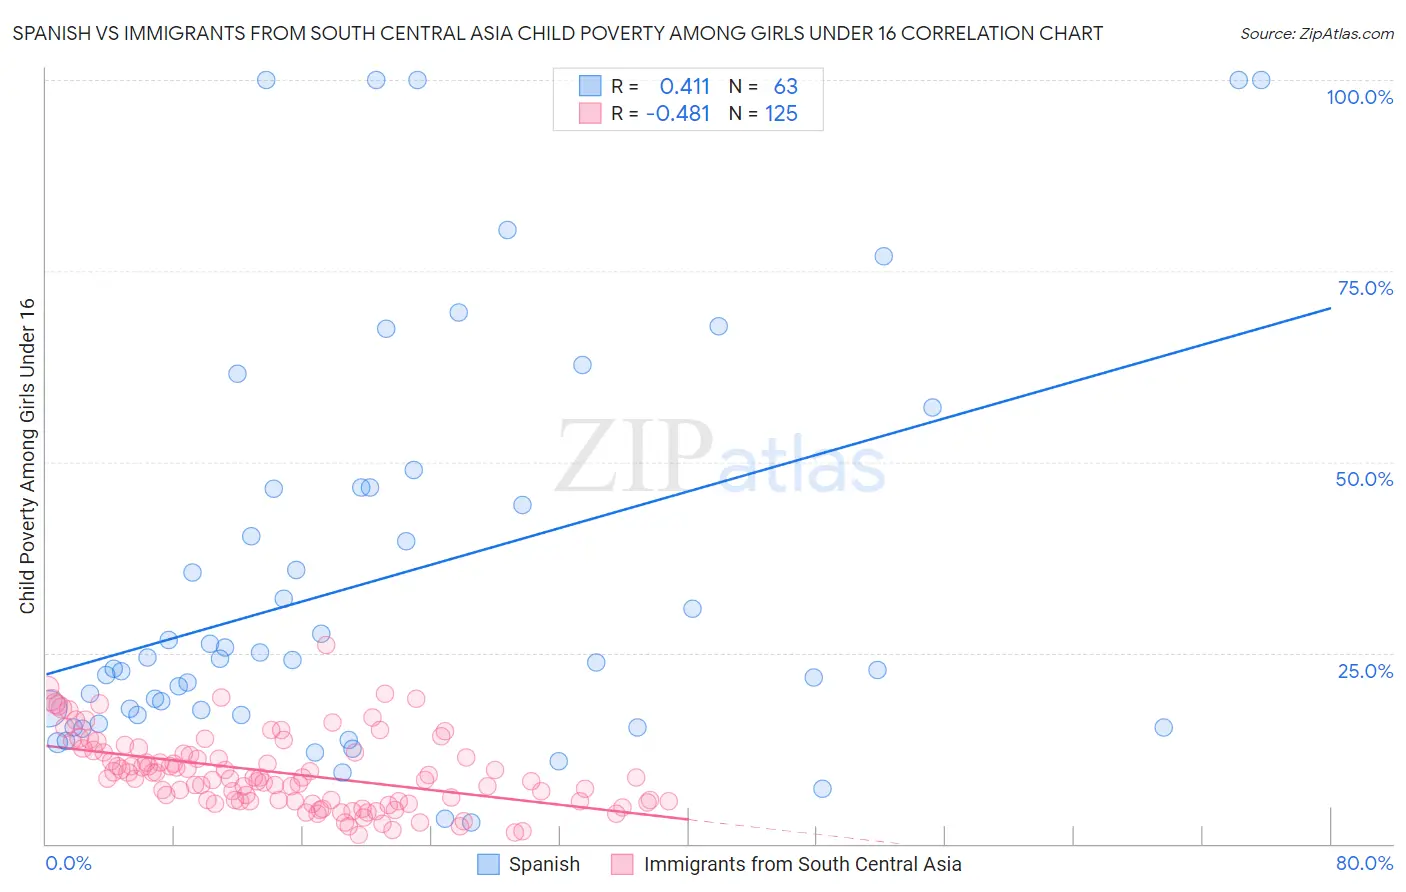 Spanish vs Immigrants from South Central Asia Child Poverty Among Girls Under 16